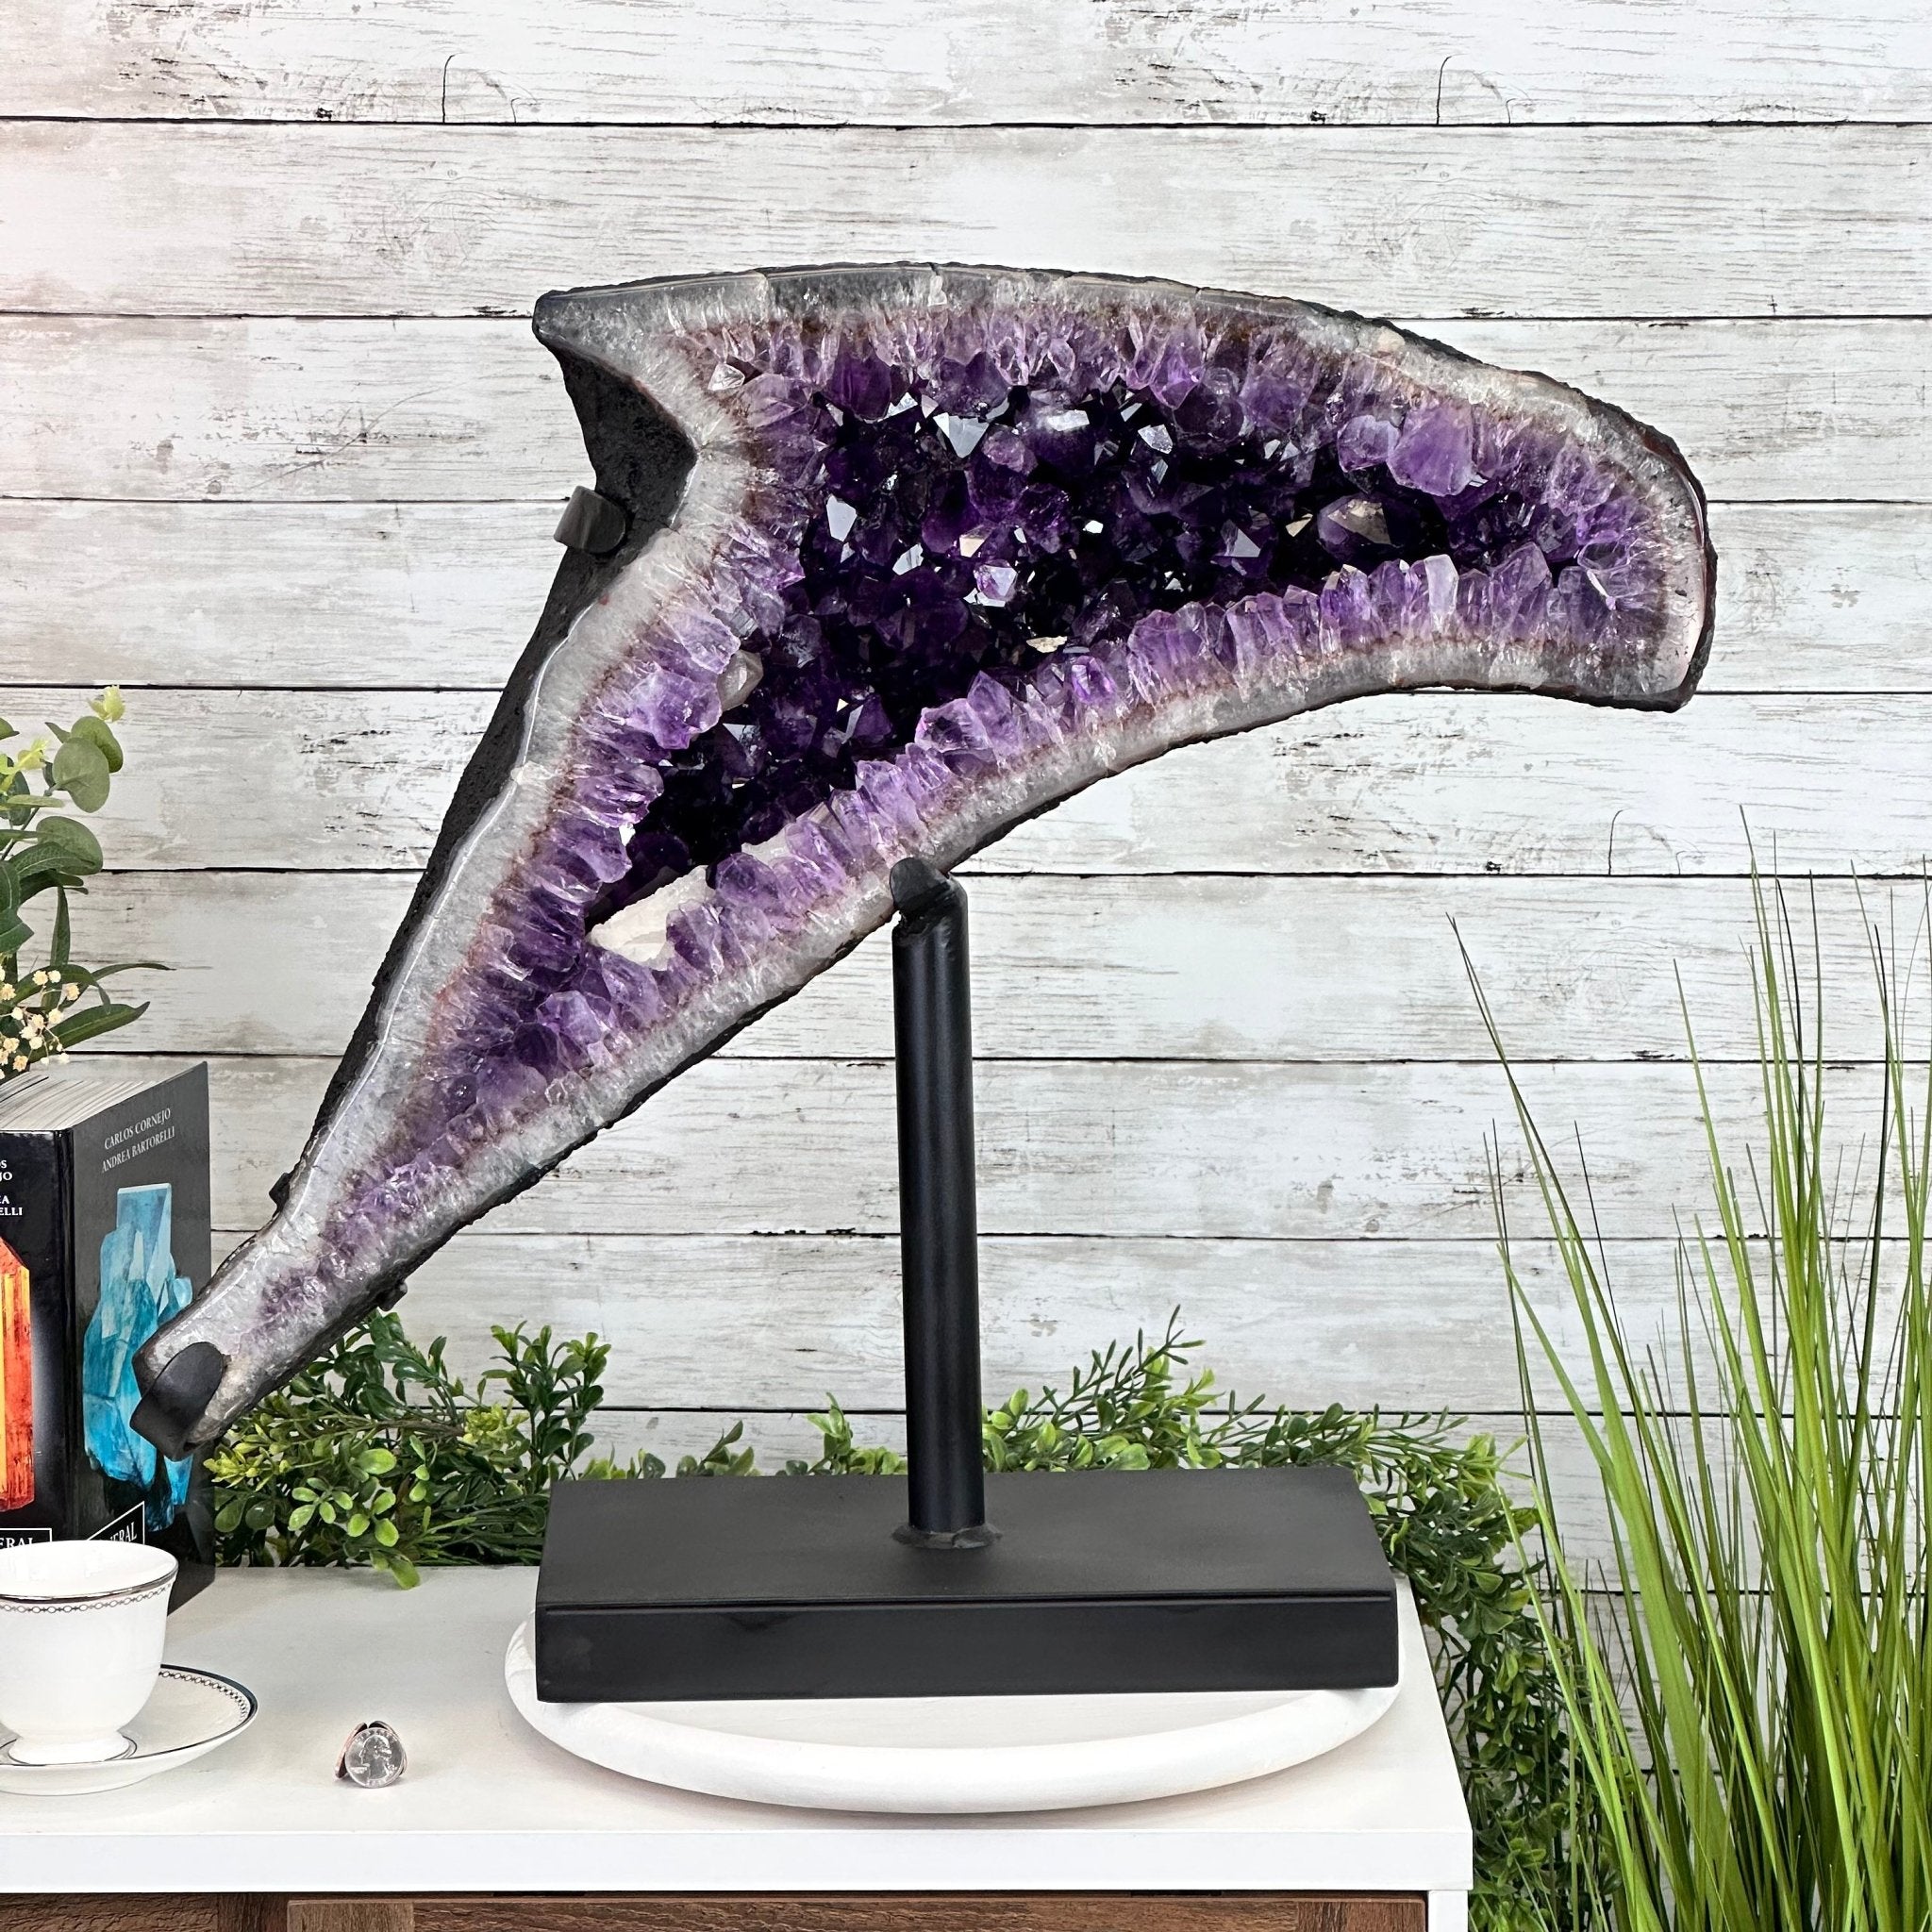 Super Quality Amethyst Cluster "Dolphin" on Metal Stand, 63.9 lbs & 23.1" tall #5491-0059 by Brazil Gems - Brazil GemsBrazil GemsSuper Quality Amethyst Cluster "Dolphin" on Metal Stand, 63.9 lbs & 23.1" tall #5491-0059 by Brazil GemsClusters on Fixed Bases5491-0059